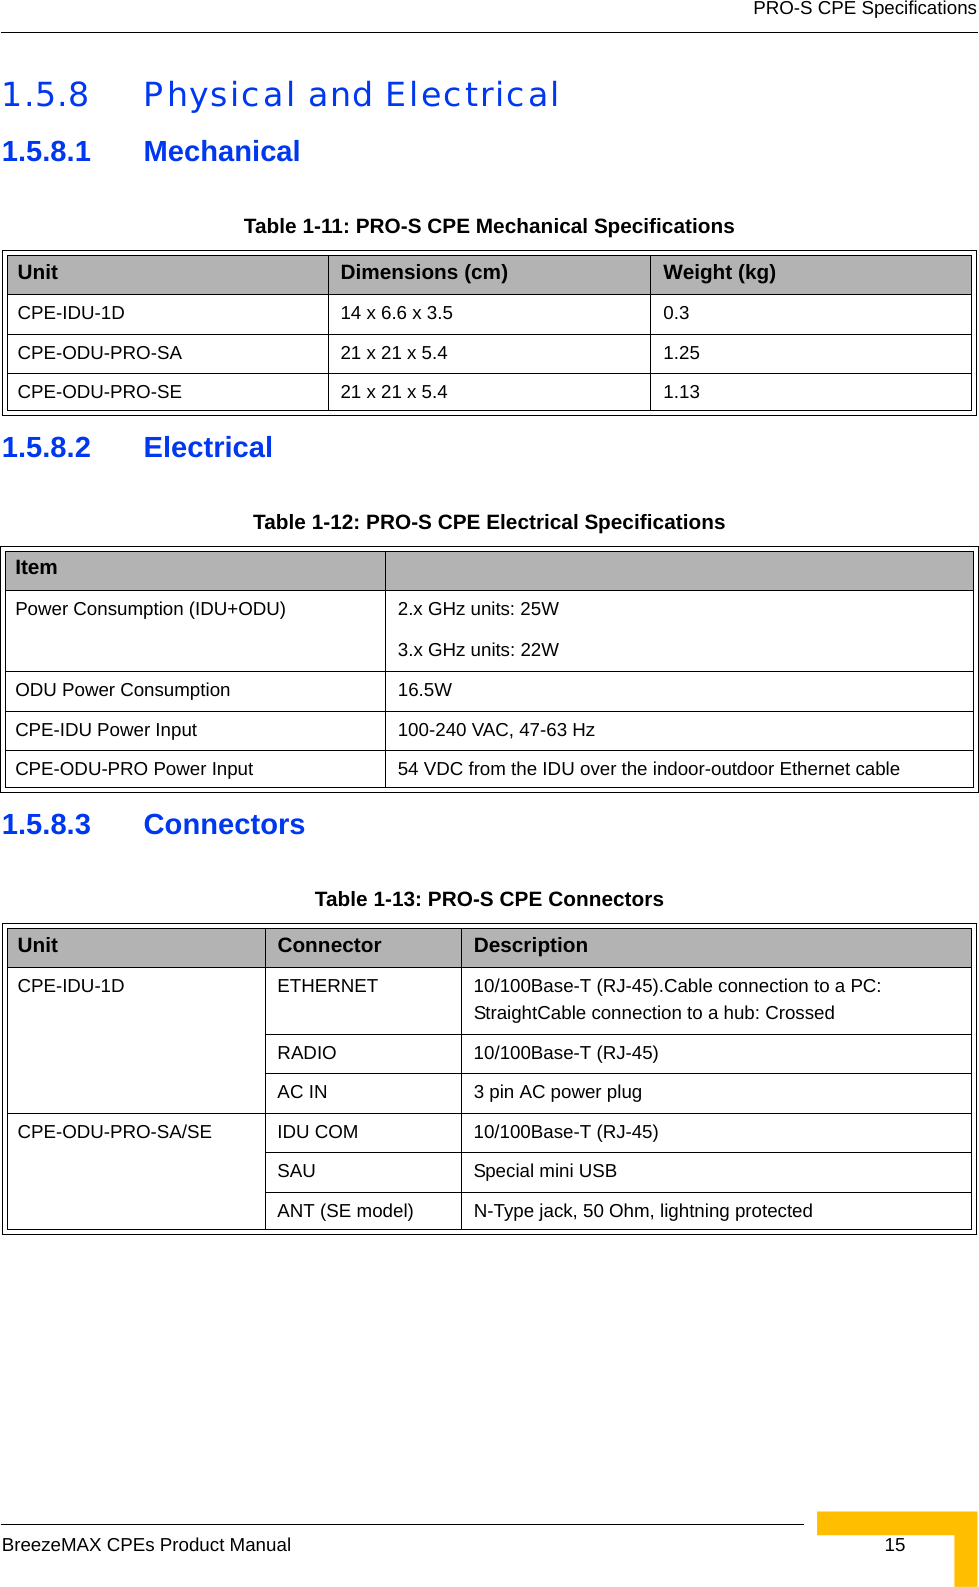 PRO-S CPE SpecificationsBreezeMAX CPEs Product Manual  151.5.8 Physical and Electrical 1.5.8.1 Mechanical 1.5.8.2 Electrical1.5.8.3 ConnectorsTable 1-11: PRO-S CPE Mechanical SpecificationsUnit Dimensions (cm) Weight (kg) CPE-IDU-1D 14 x 6.6 x 3.5 0.3CPE-ODU-PRO-SA 21 x 21 x 5.4 1.25CPE-ODU-PRO-SE 21 x 21 x 5.4 1.13Table 1-12: PRO-S CPE Electrical SpecificationsItemPower Consumption (IDU+ODU) 2.x GHz units: 25W3.x GHz units: 22WODU Power Consumption 16.5WCPE-IDU Power Input 100-240 VAC, 47-63 HzCPE-ODU-PRO Power Input 54 VDC from the IDU over the indoor-outdoor Ethernet cableTable 1-13: PRO-S CPE ConnectorsUnit Connector DescriptionCPE-IDU-1D ETHERNET 10/100Base-T (RJ-45).Cable connection to a PC: StraightCable connection to a hub: CrossedRADIO 10/100Base-T (RJ-45)AC IN 3 pin AC power plugCPE-ODU-PRO-SA/SE IDU COM 10/100Base-T (RJ-45)SAU Special mini USBANT (SE model) N-Type jack, 50 Ohm, lightning protected